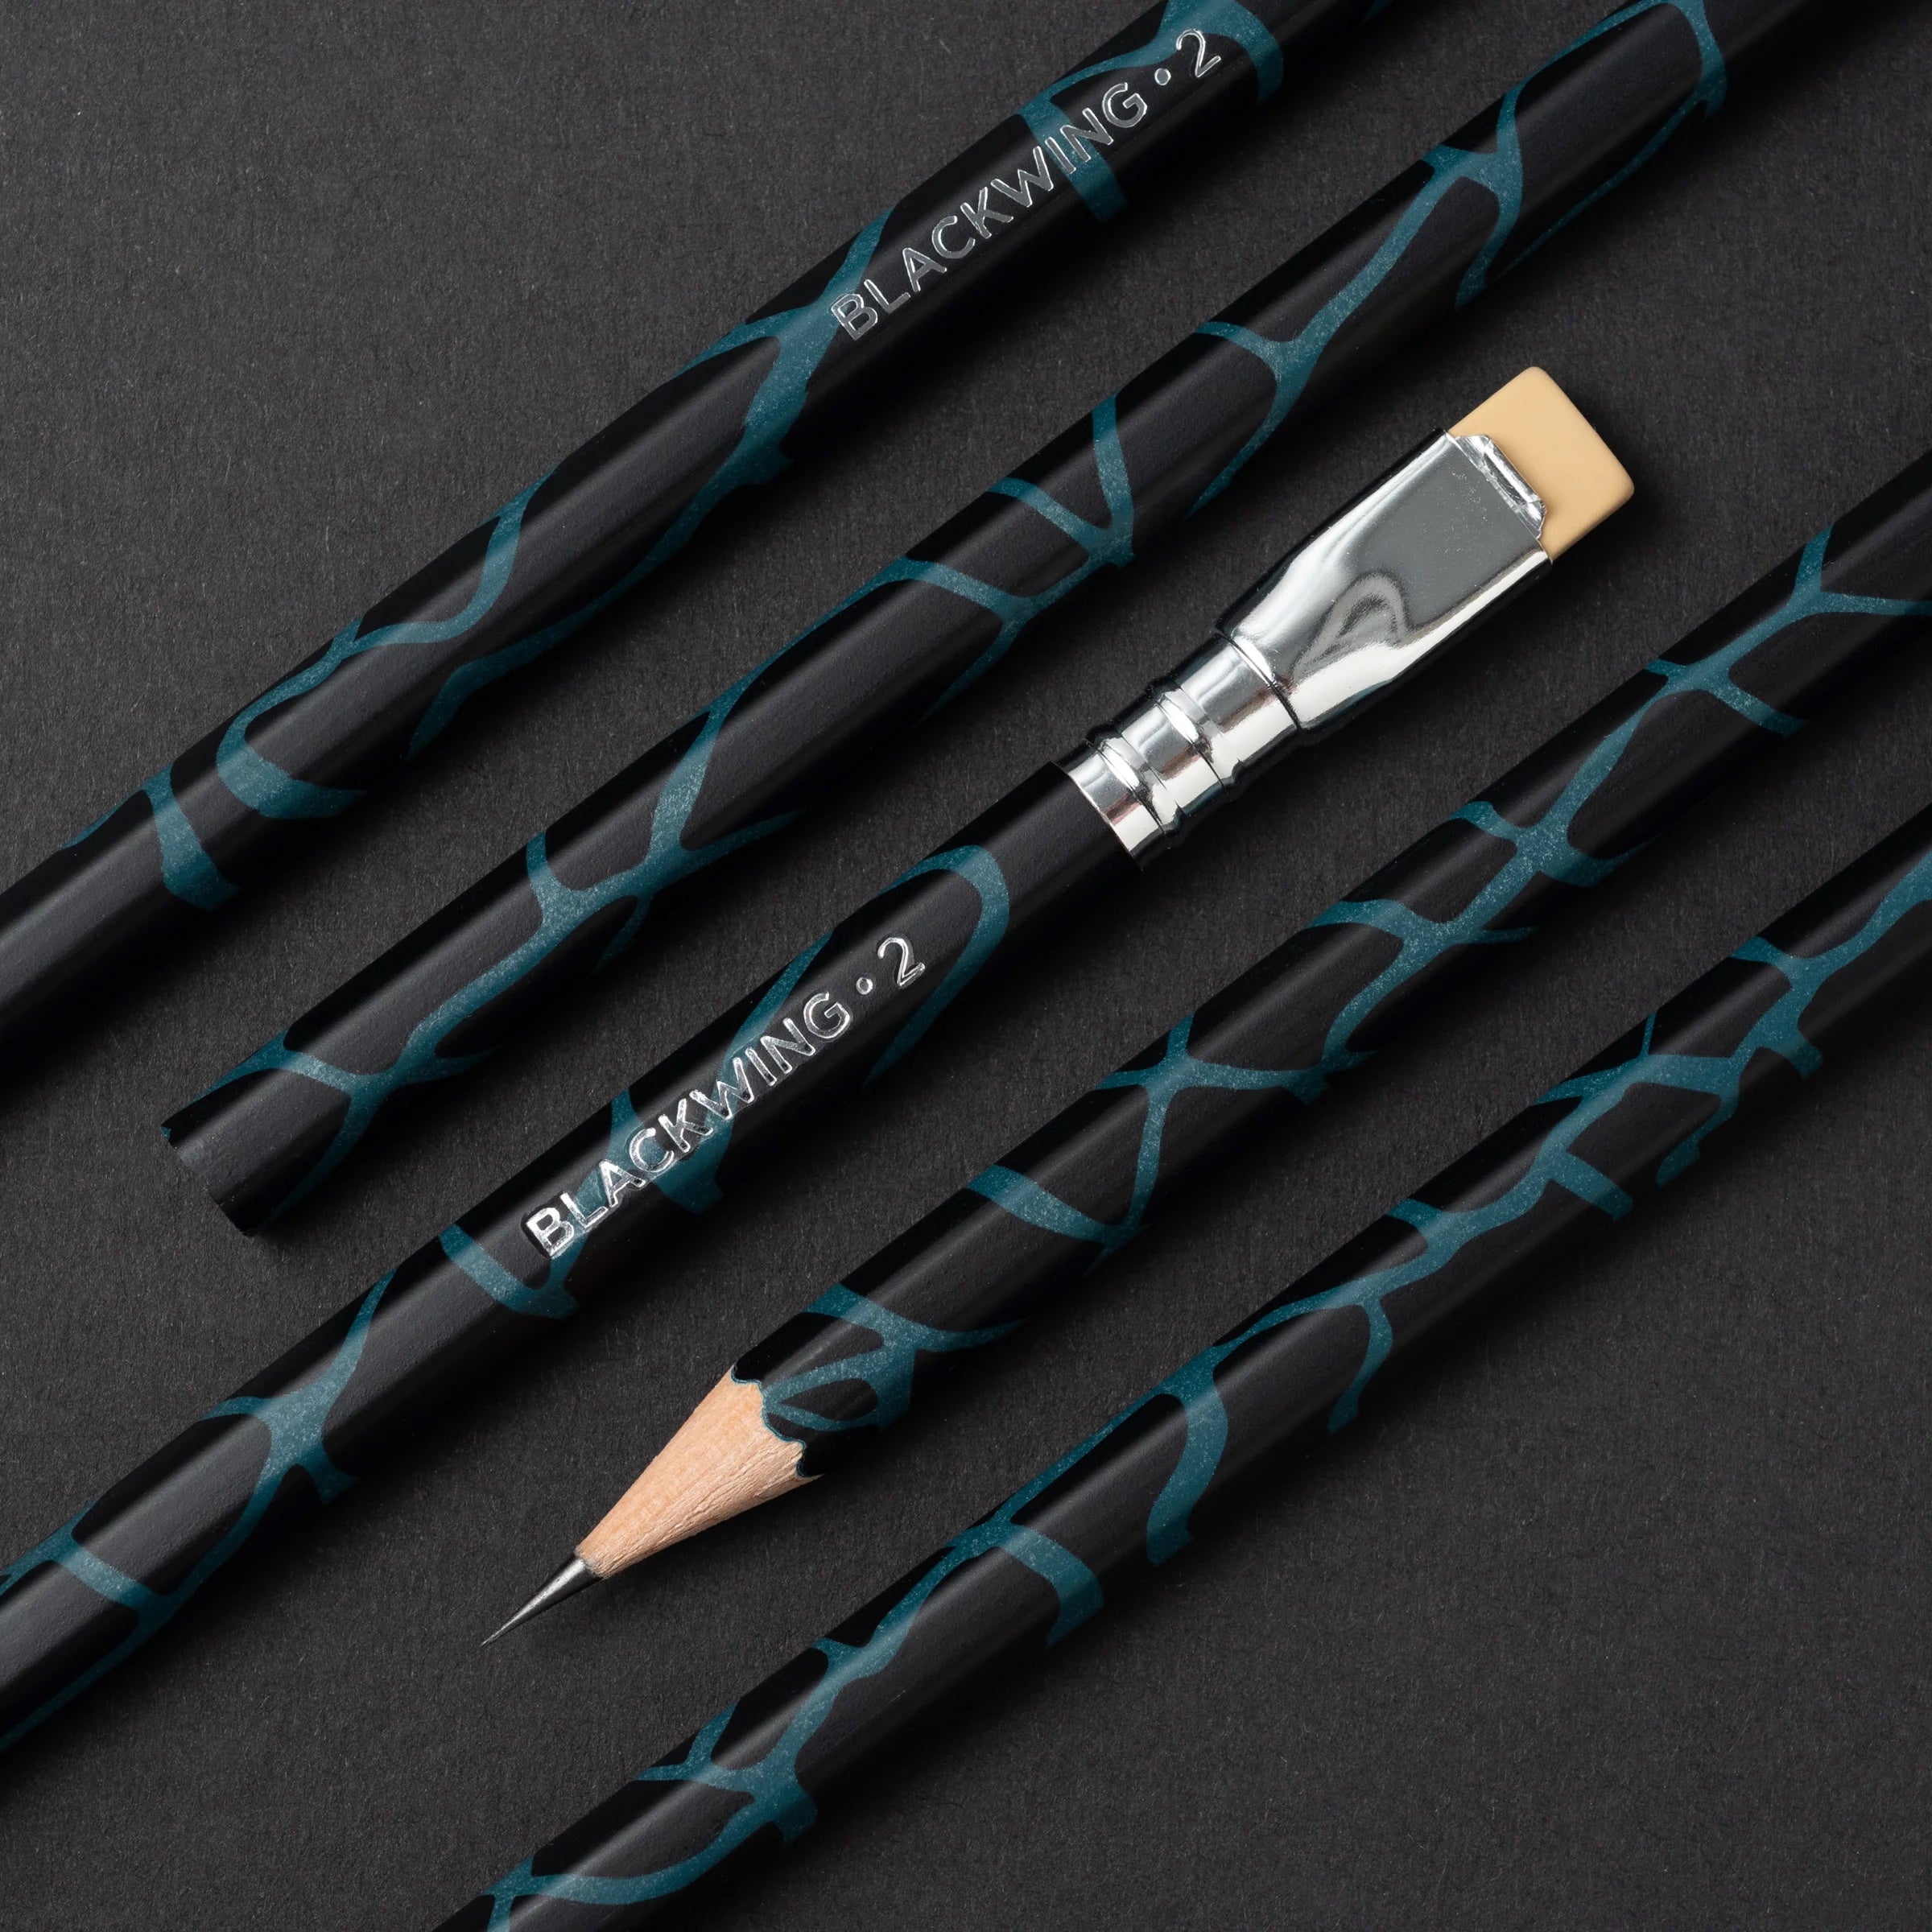 Blackwing Volume 2 Limited Edition Pencils - 2X Firm - Box of 12